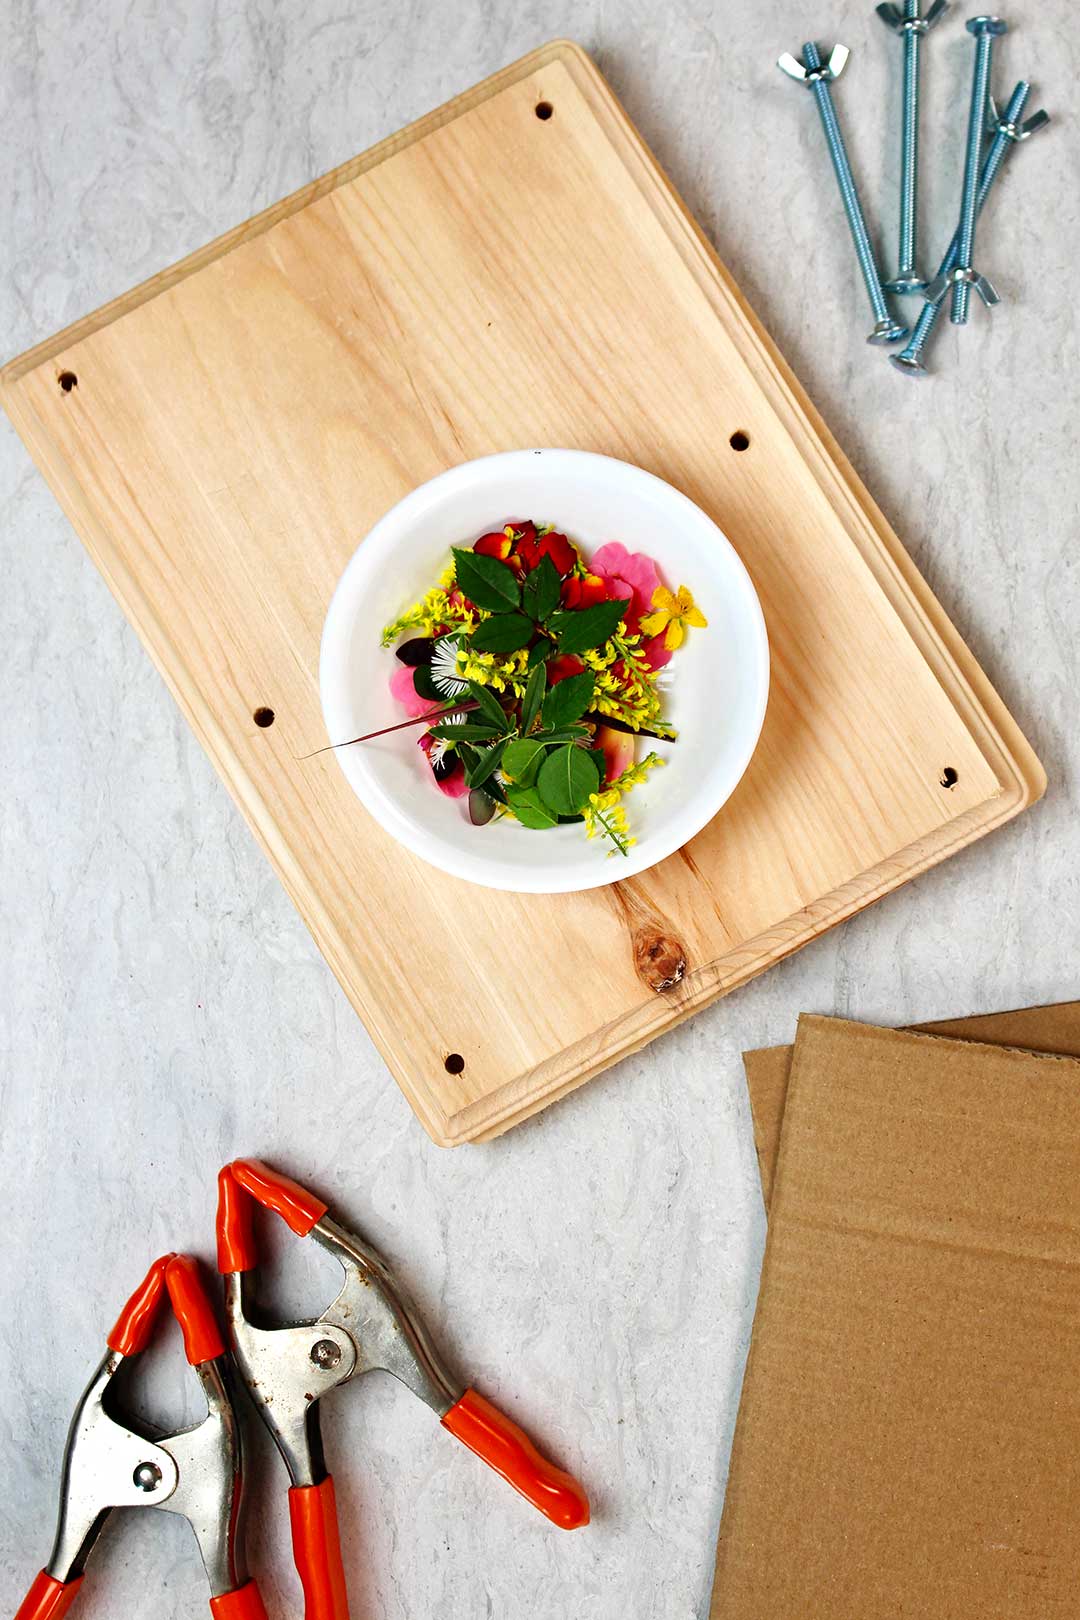 White plate of colorful flowers and leaves rests on wooden block with orange clamps, cardboard and long screws with butterfly nuts nearby.